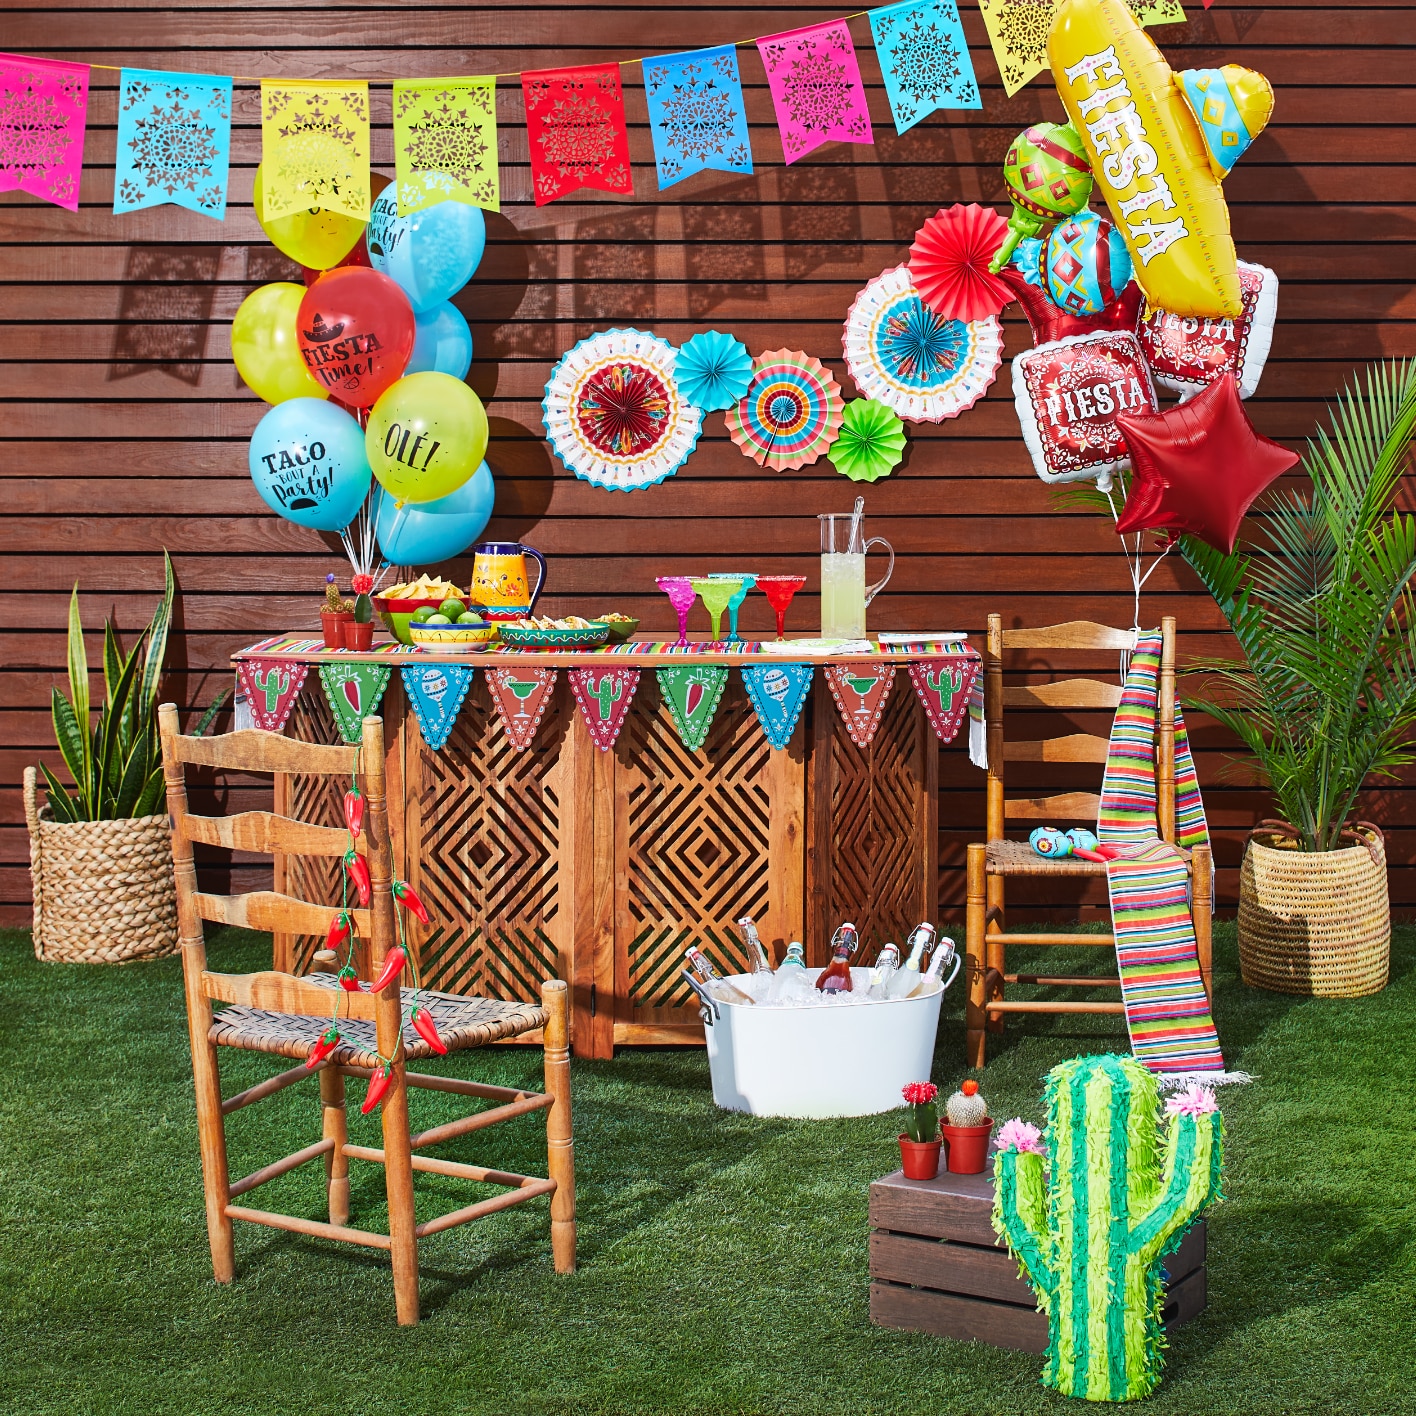 Outdoor party with colourful décor like streamers, balloons, tableware and serveware.